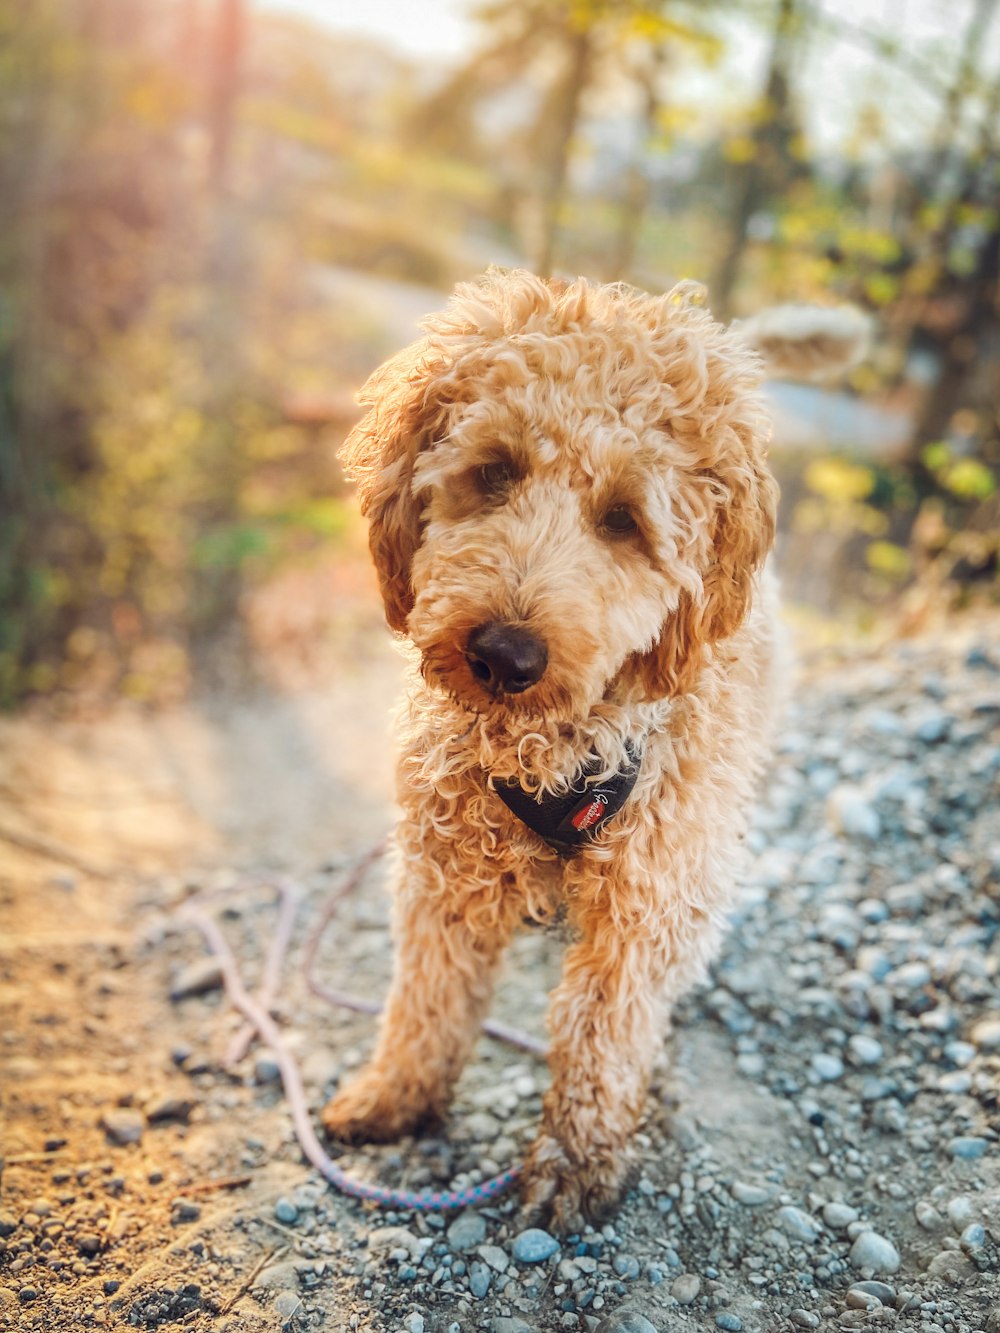 brown curly haired small dog photo – Free Mammal Image on Unsplash